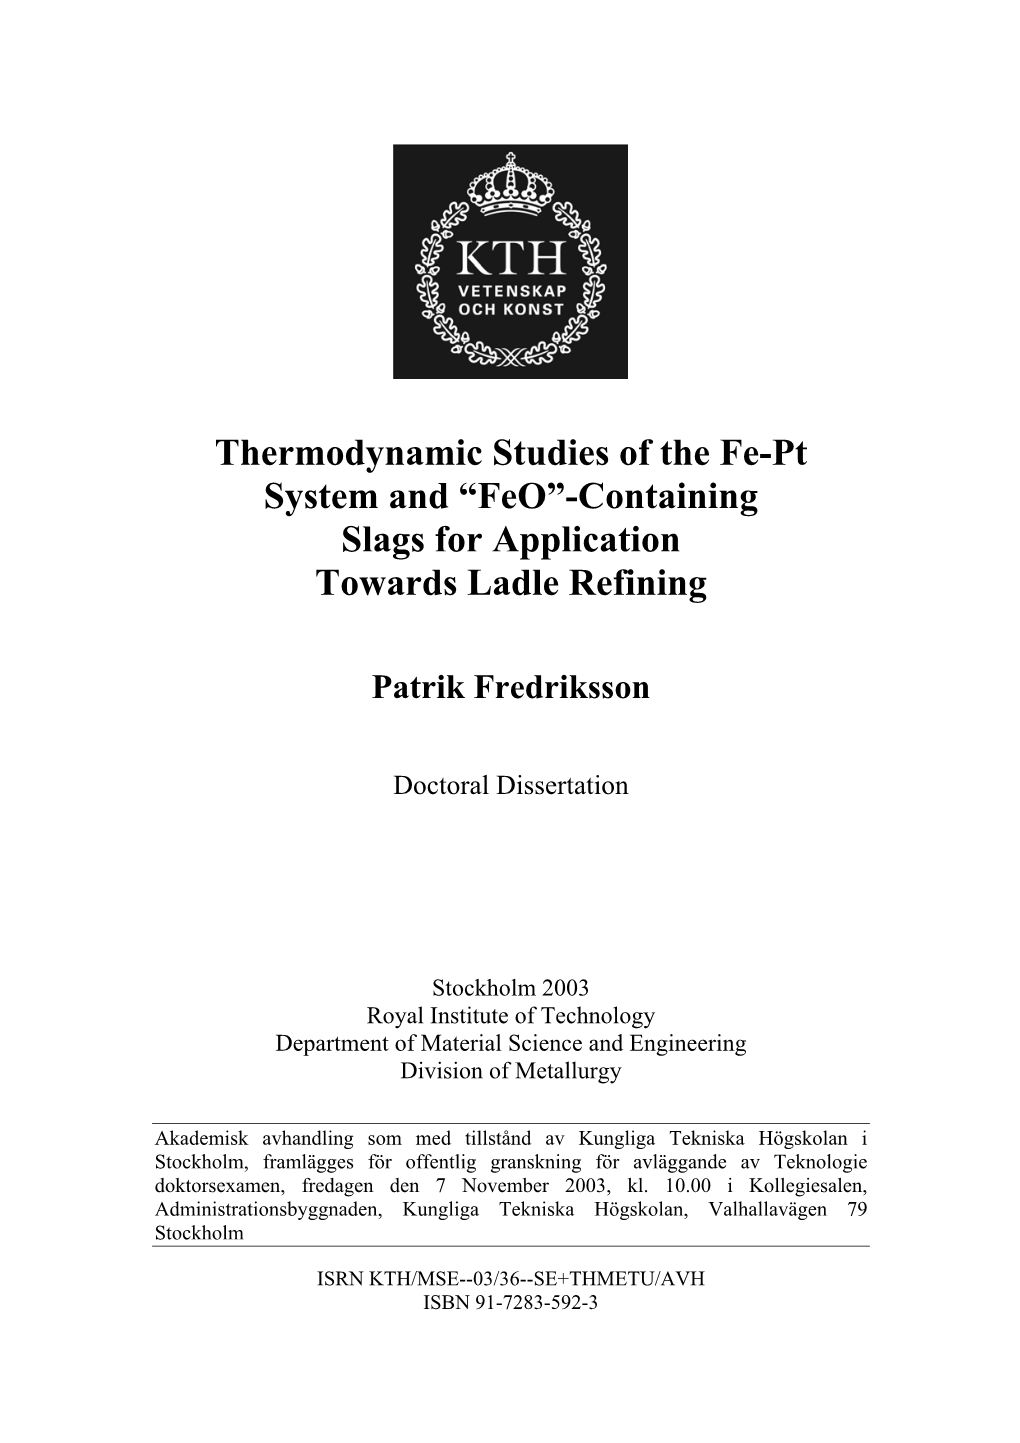 Thermodynamic Studies of the Fe-Pt System and “Feo”-Containing Slags for Application Towards Ladle Refining